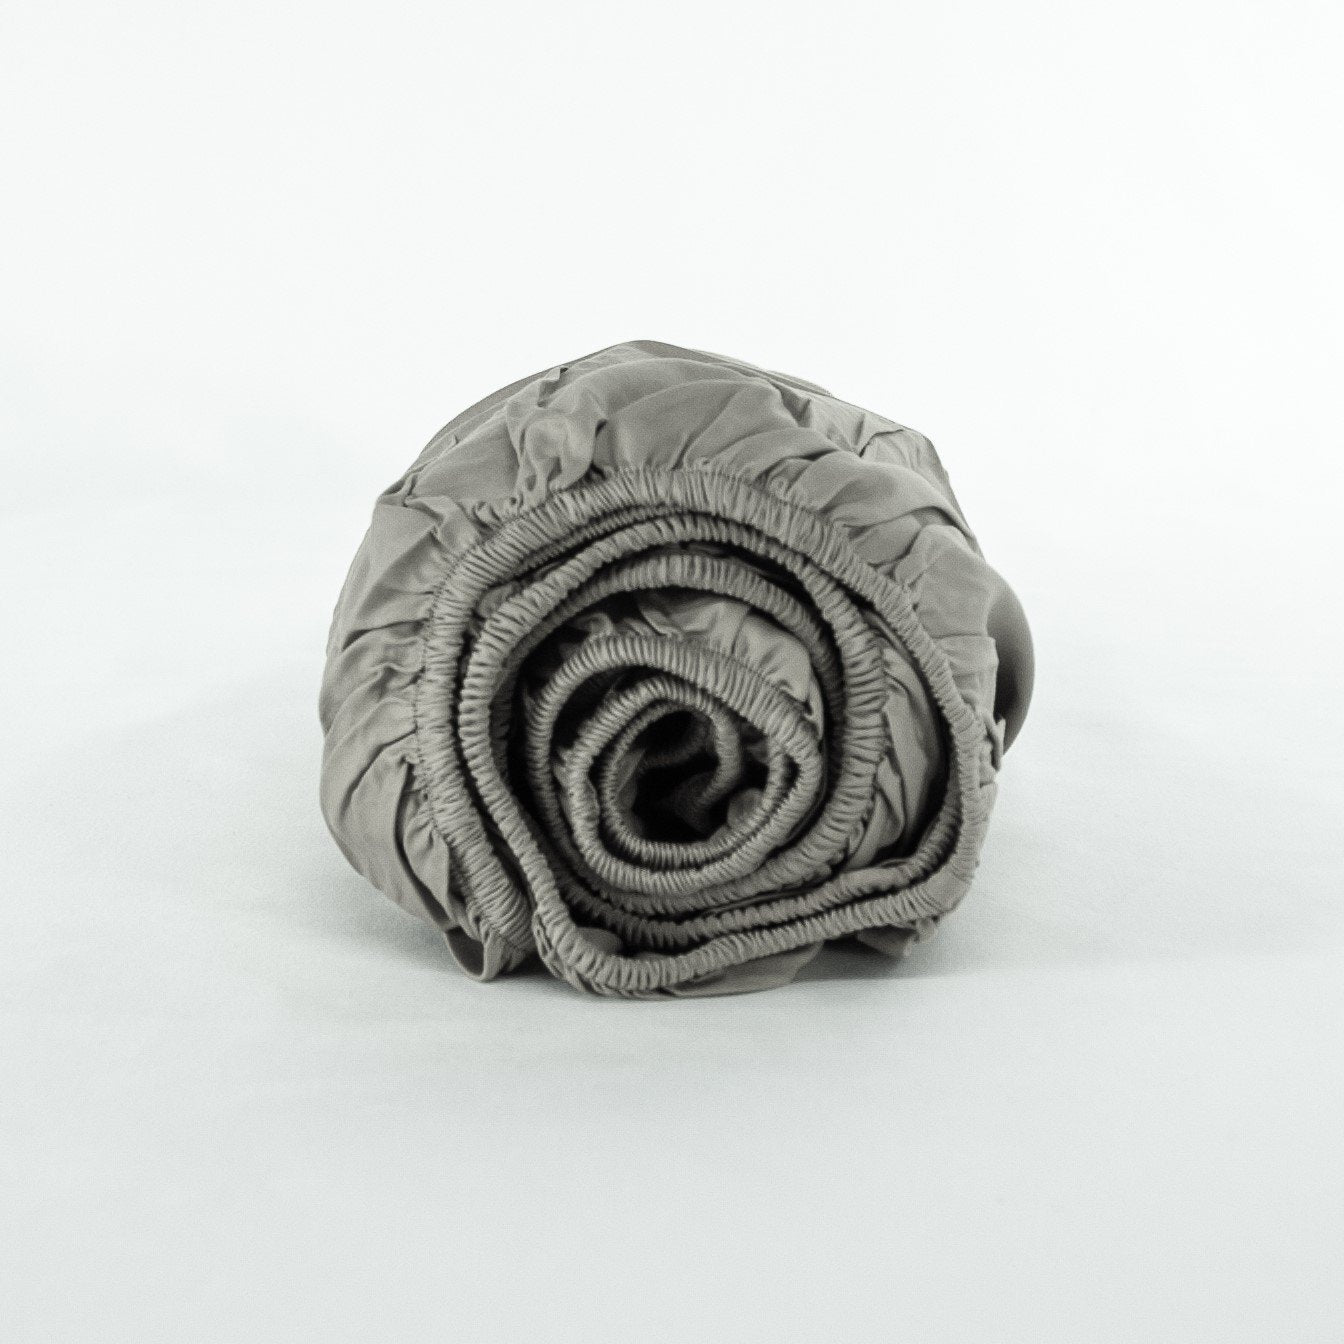 Rolled up organic cotton fitted sheet in sleet grey